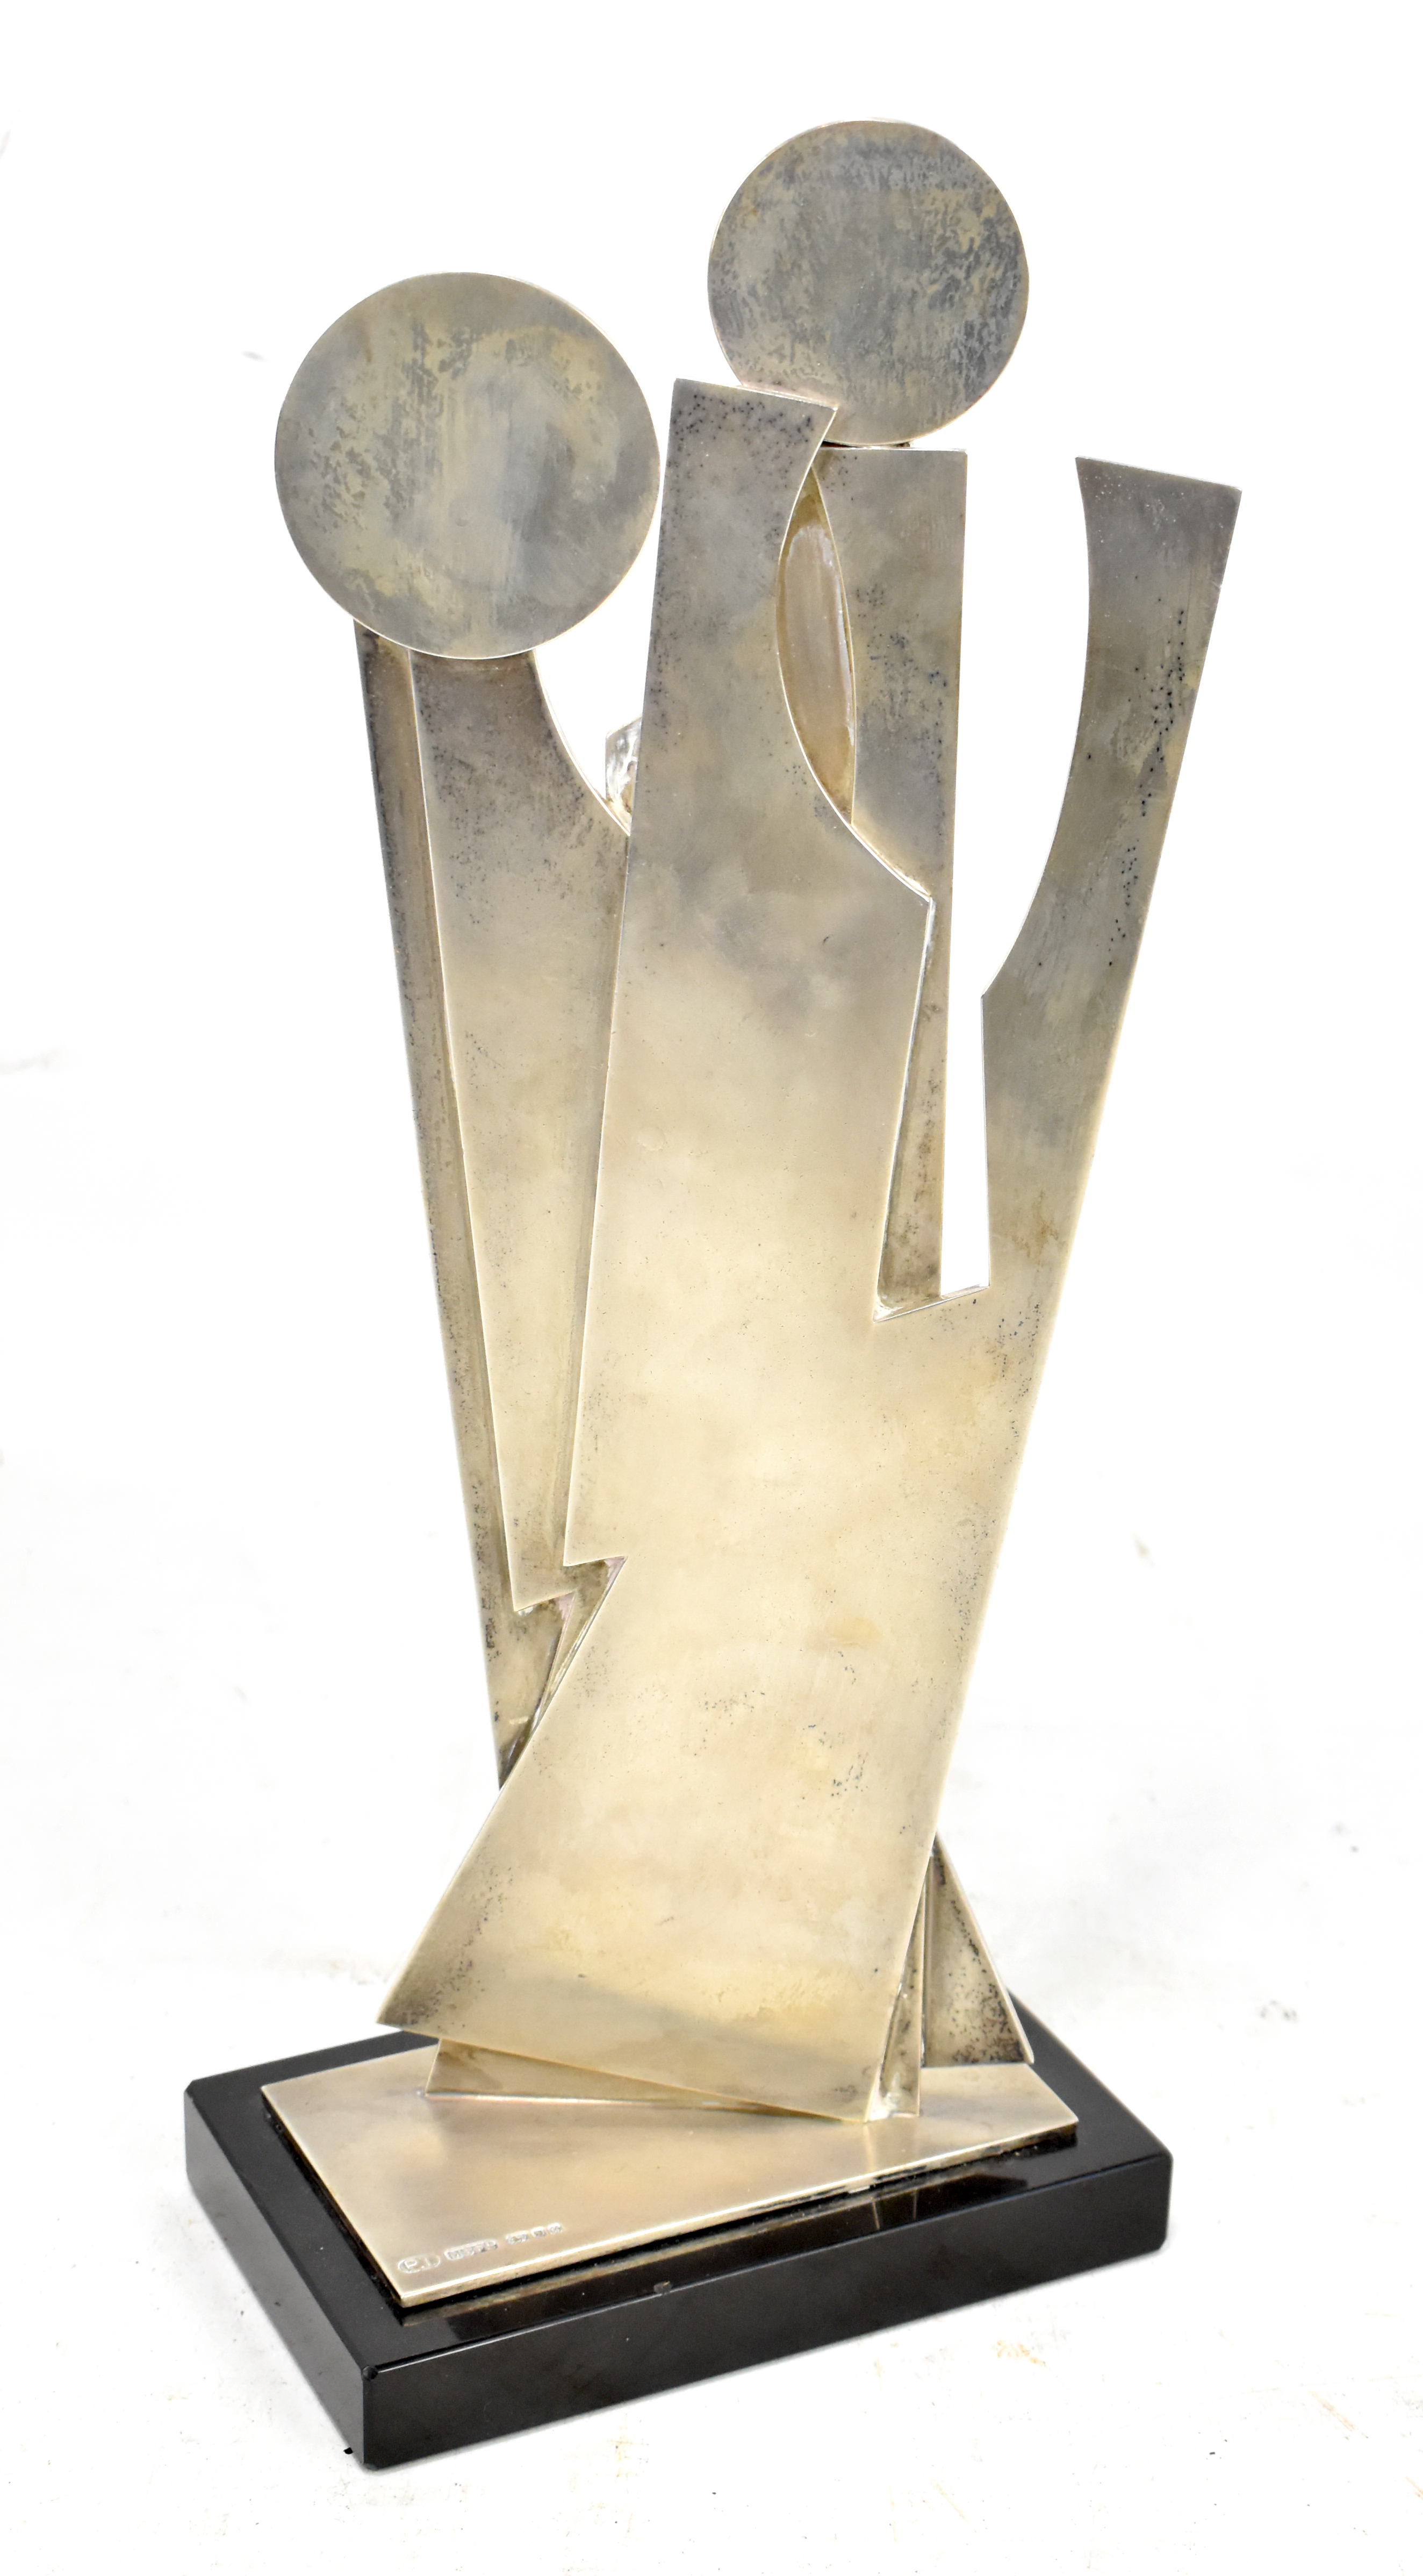 PETER THURSBY (1930-2011); a contemporary silver sculpture, 'Optimism', raised on a polished